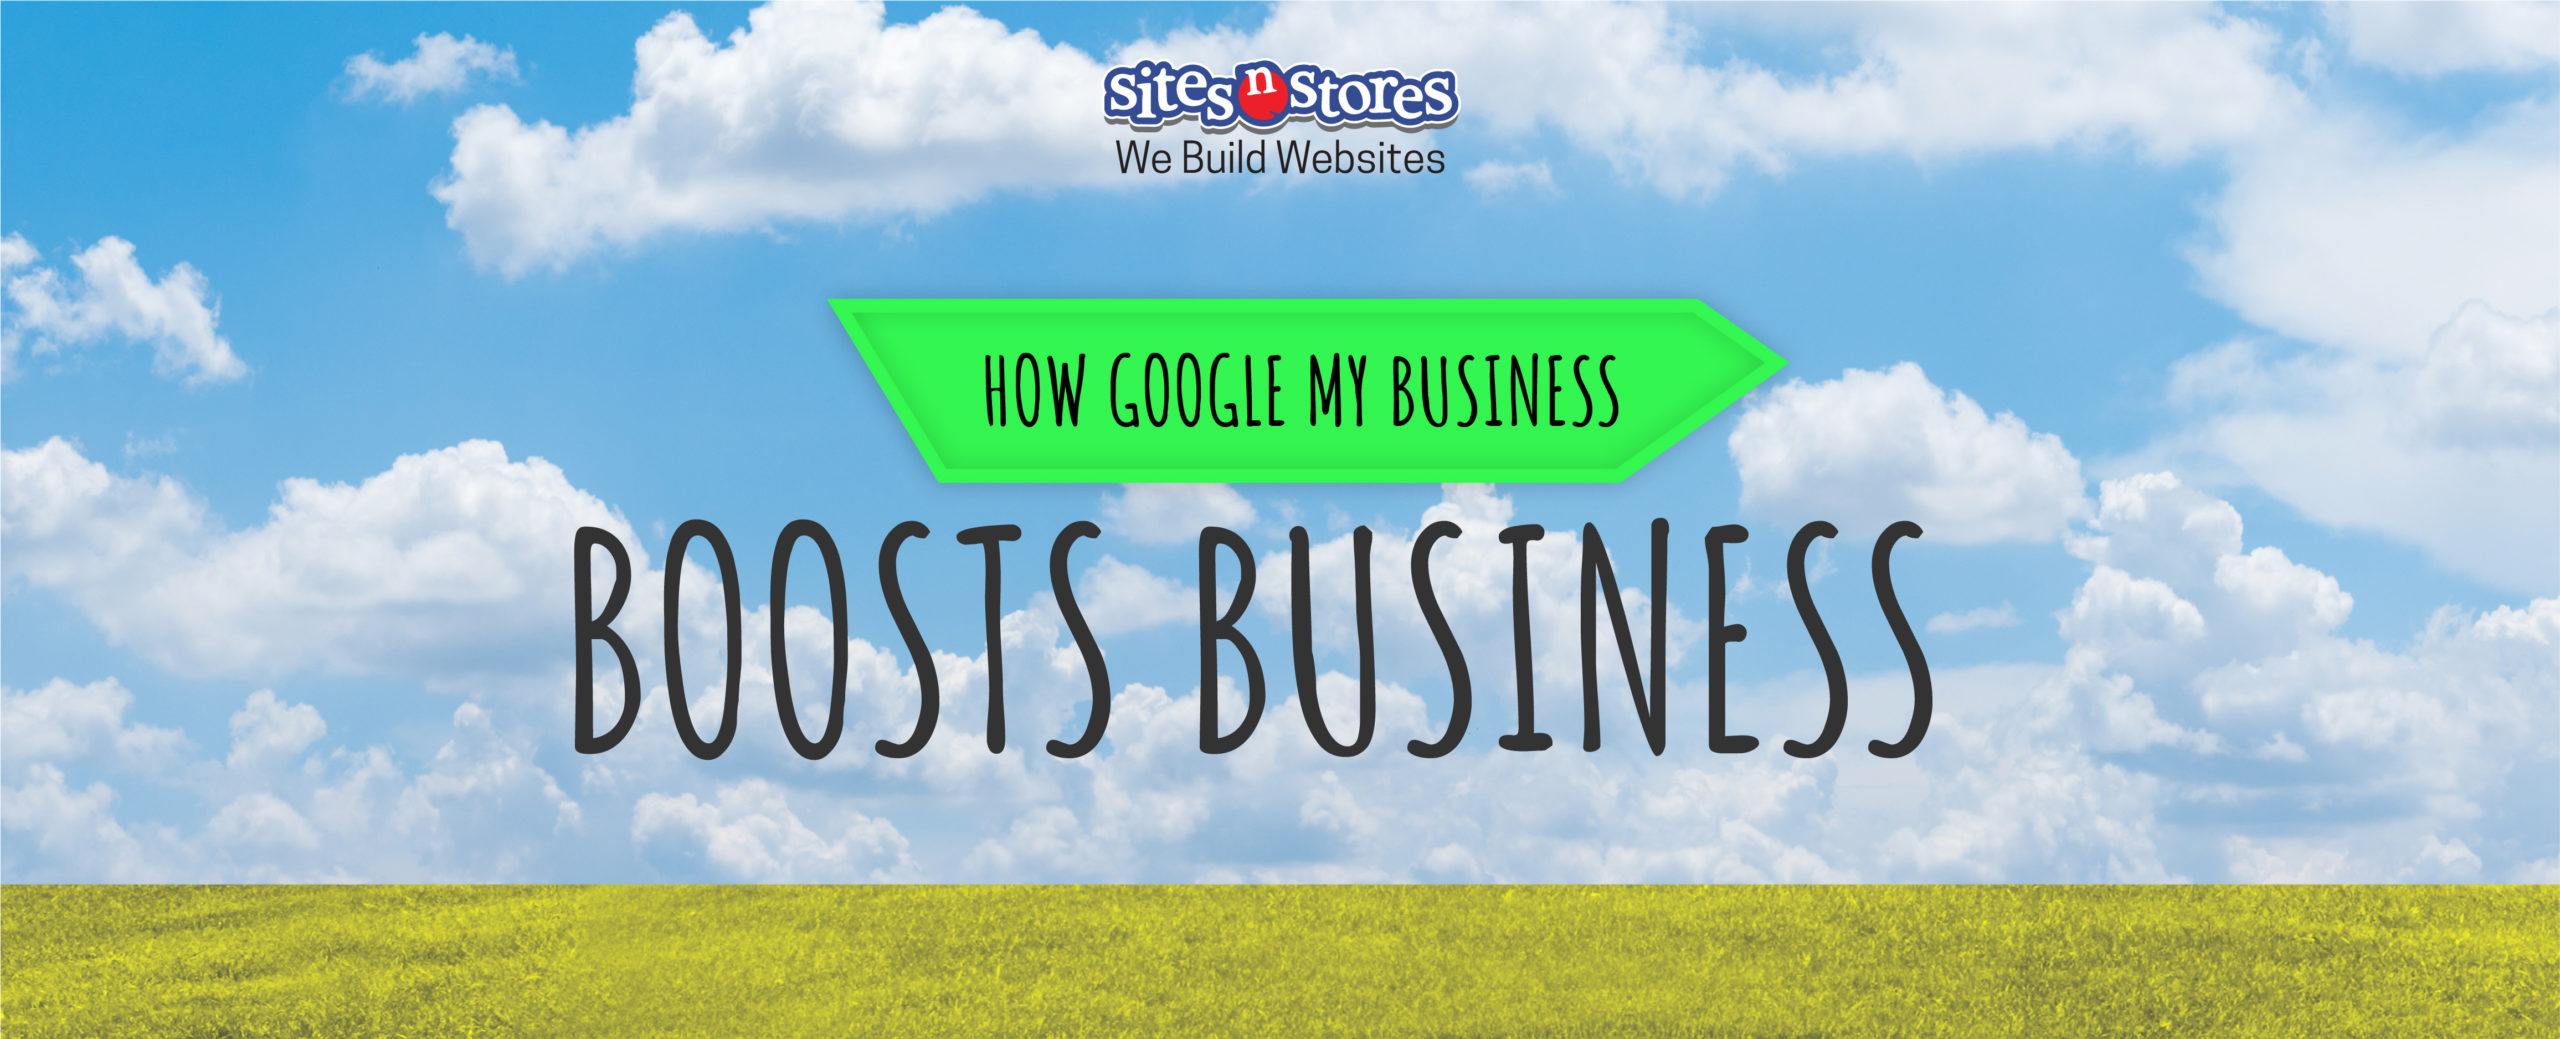 How Google My Business Boosts Business